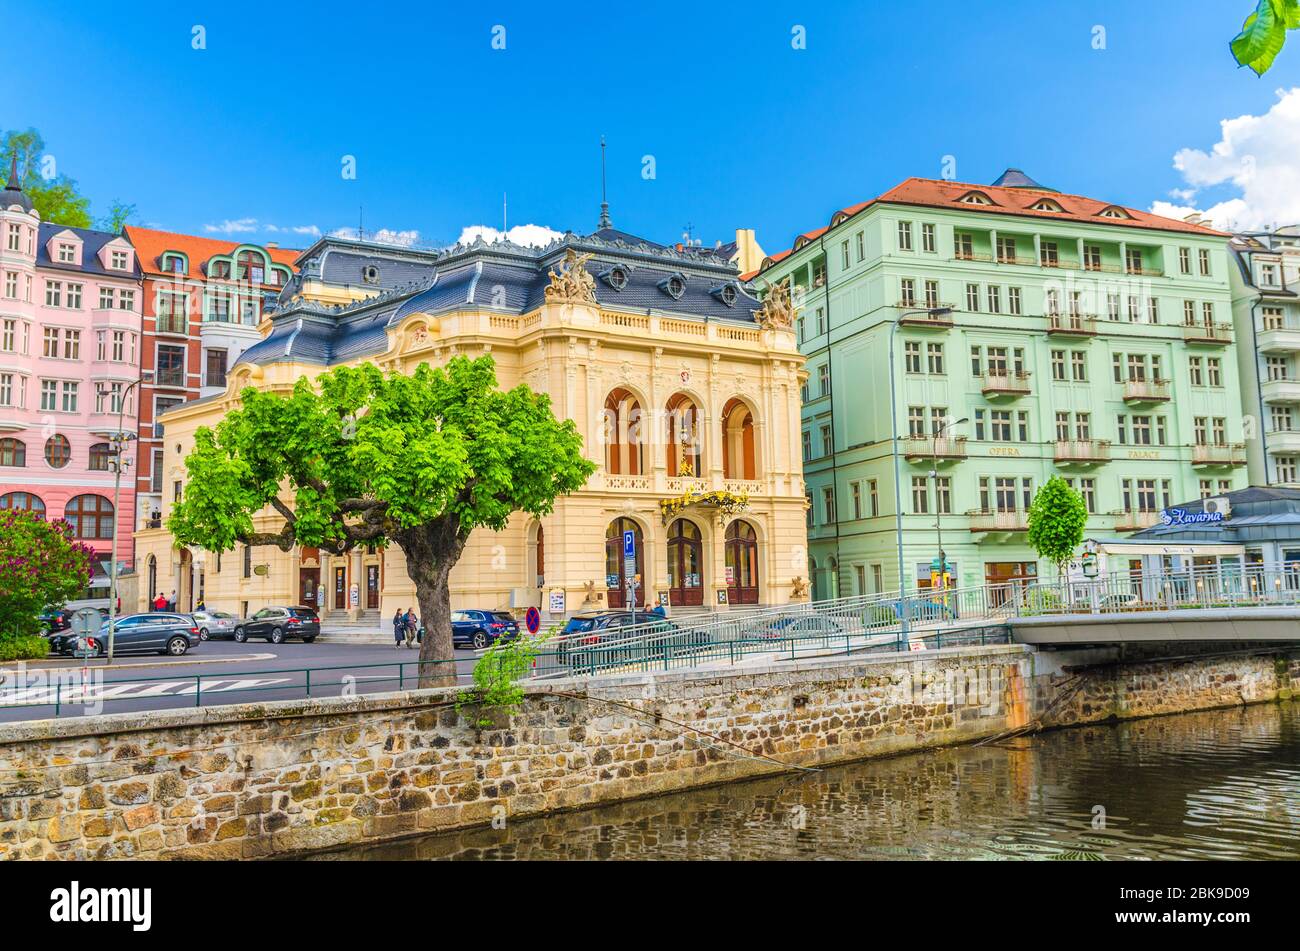 Karlovy Vary, Czech Republic, May 10, 2019: Municipal Theatre Neo-Baroque building at Theatre Square in Carlsbad historical city centre, Tepla river embankment, colorful buildings, West Bohemia Stock Photo